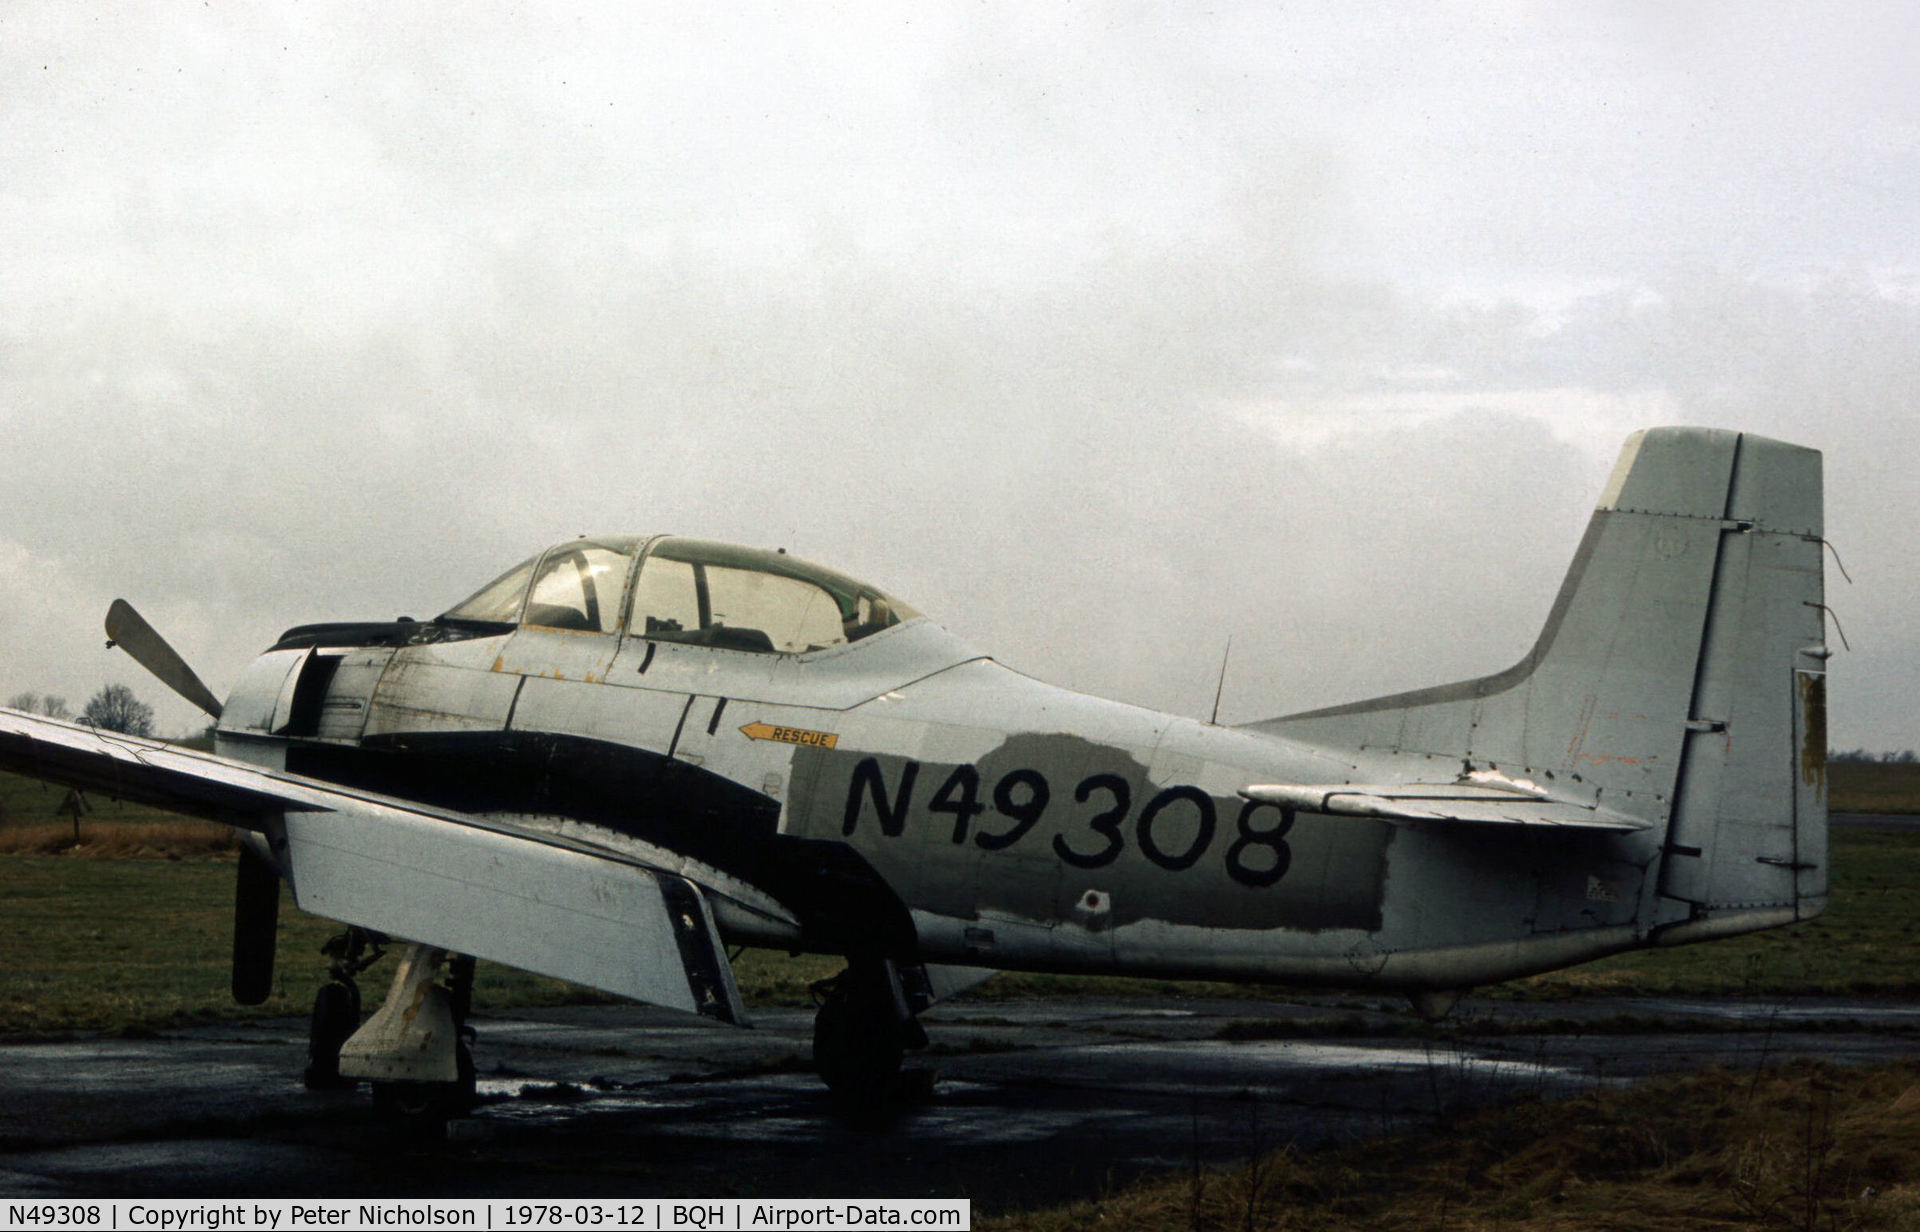 N49308, 1957 North American T-28C Trojan C/N 282-15, Ex-Zaire Air Force T-28C Trojan seen at Biggin Hill in the Spring of 1978 awaiting ferry flight to the United States  where it was later registered as N39408.